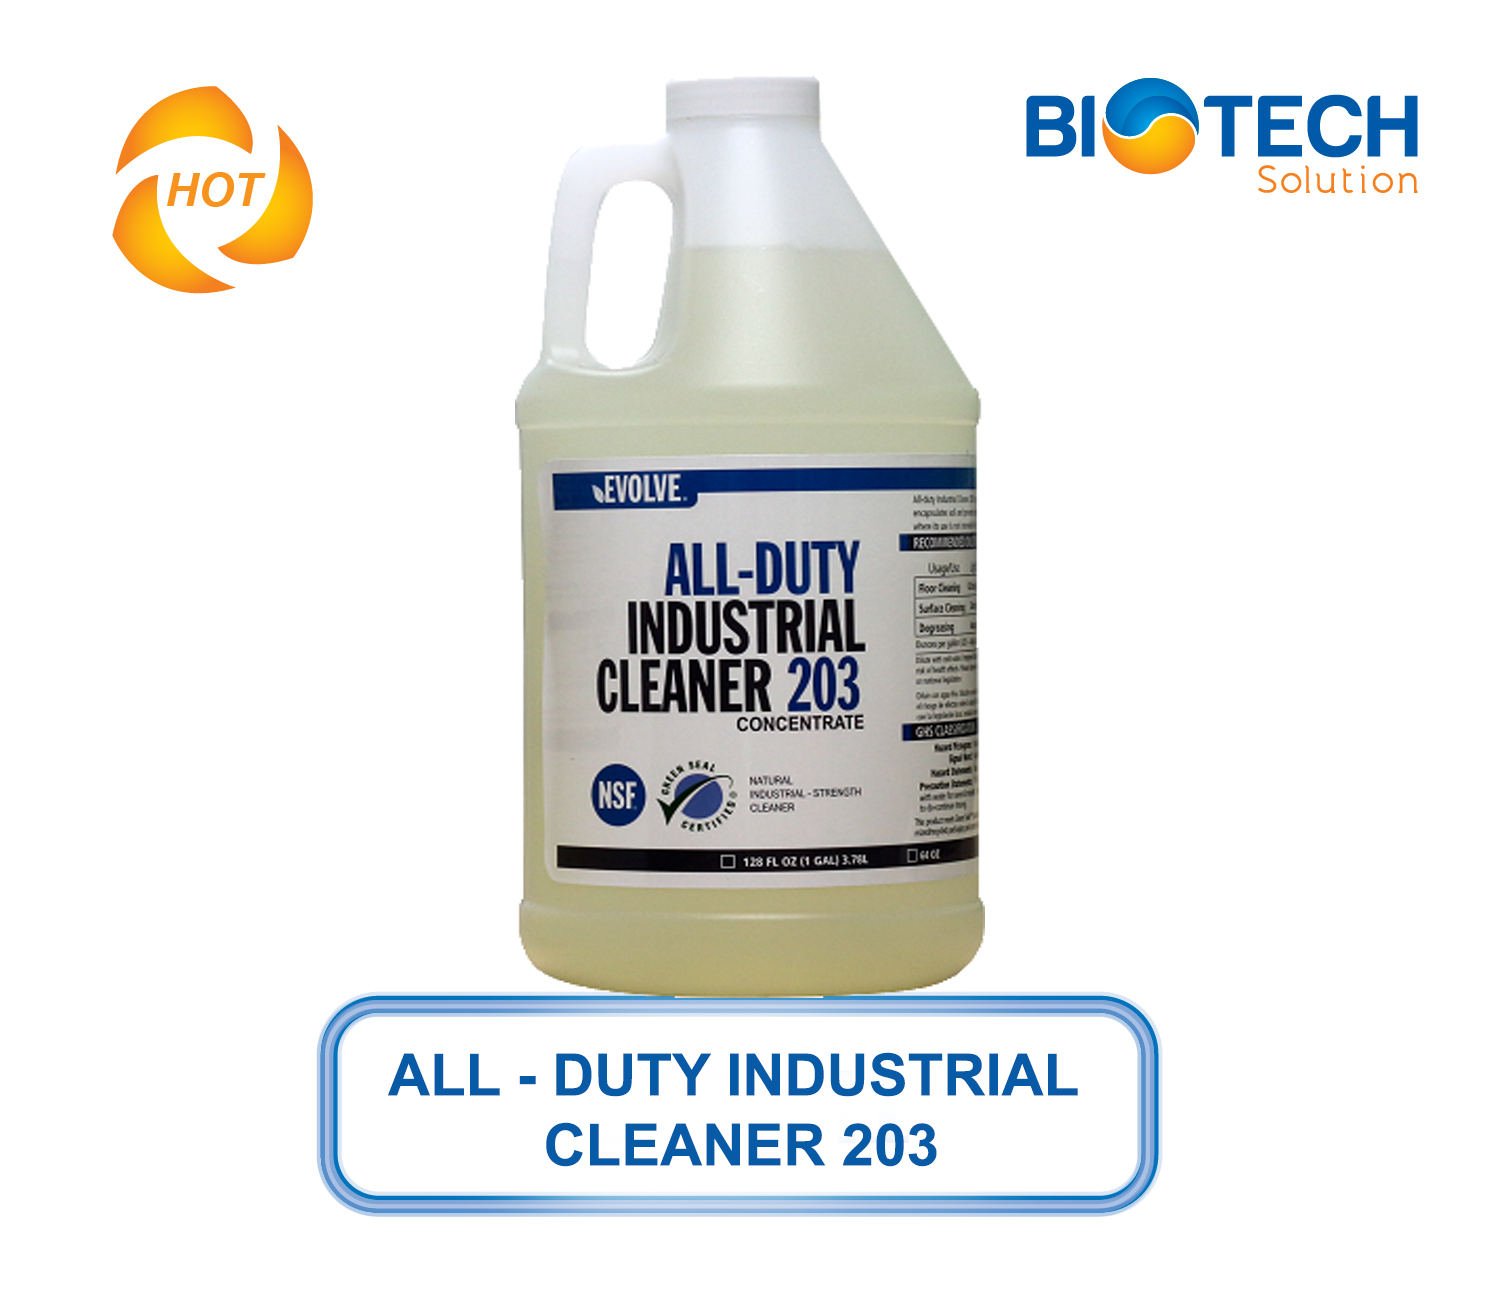 ALL-DUTY INDUSTRIAL CLEANER 203